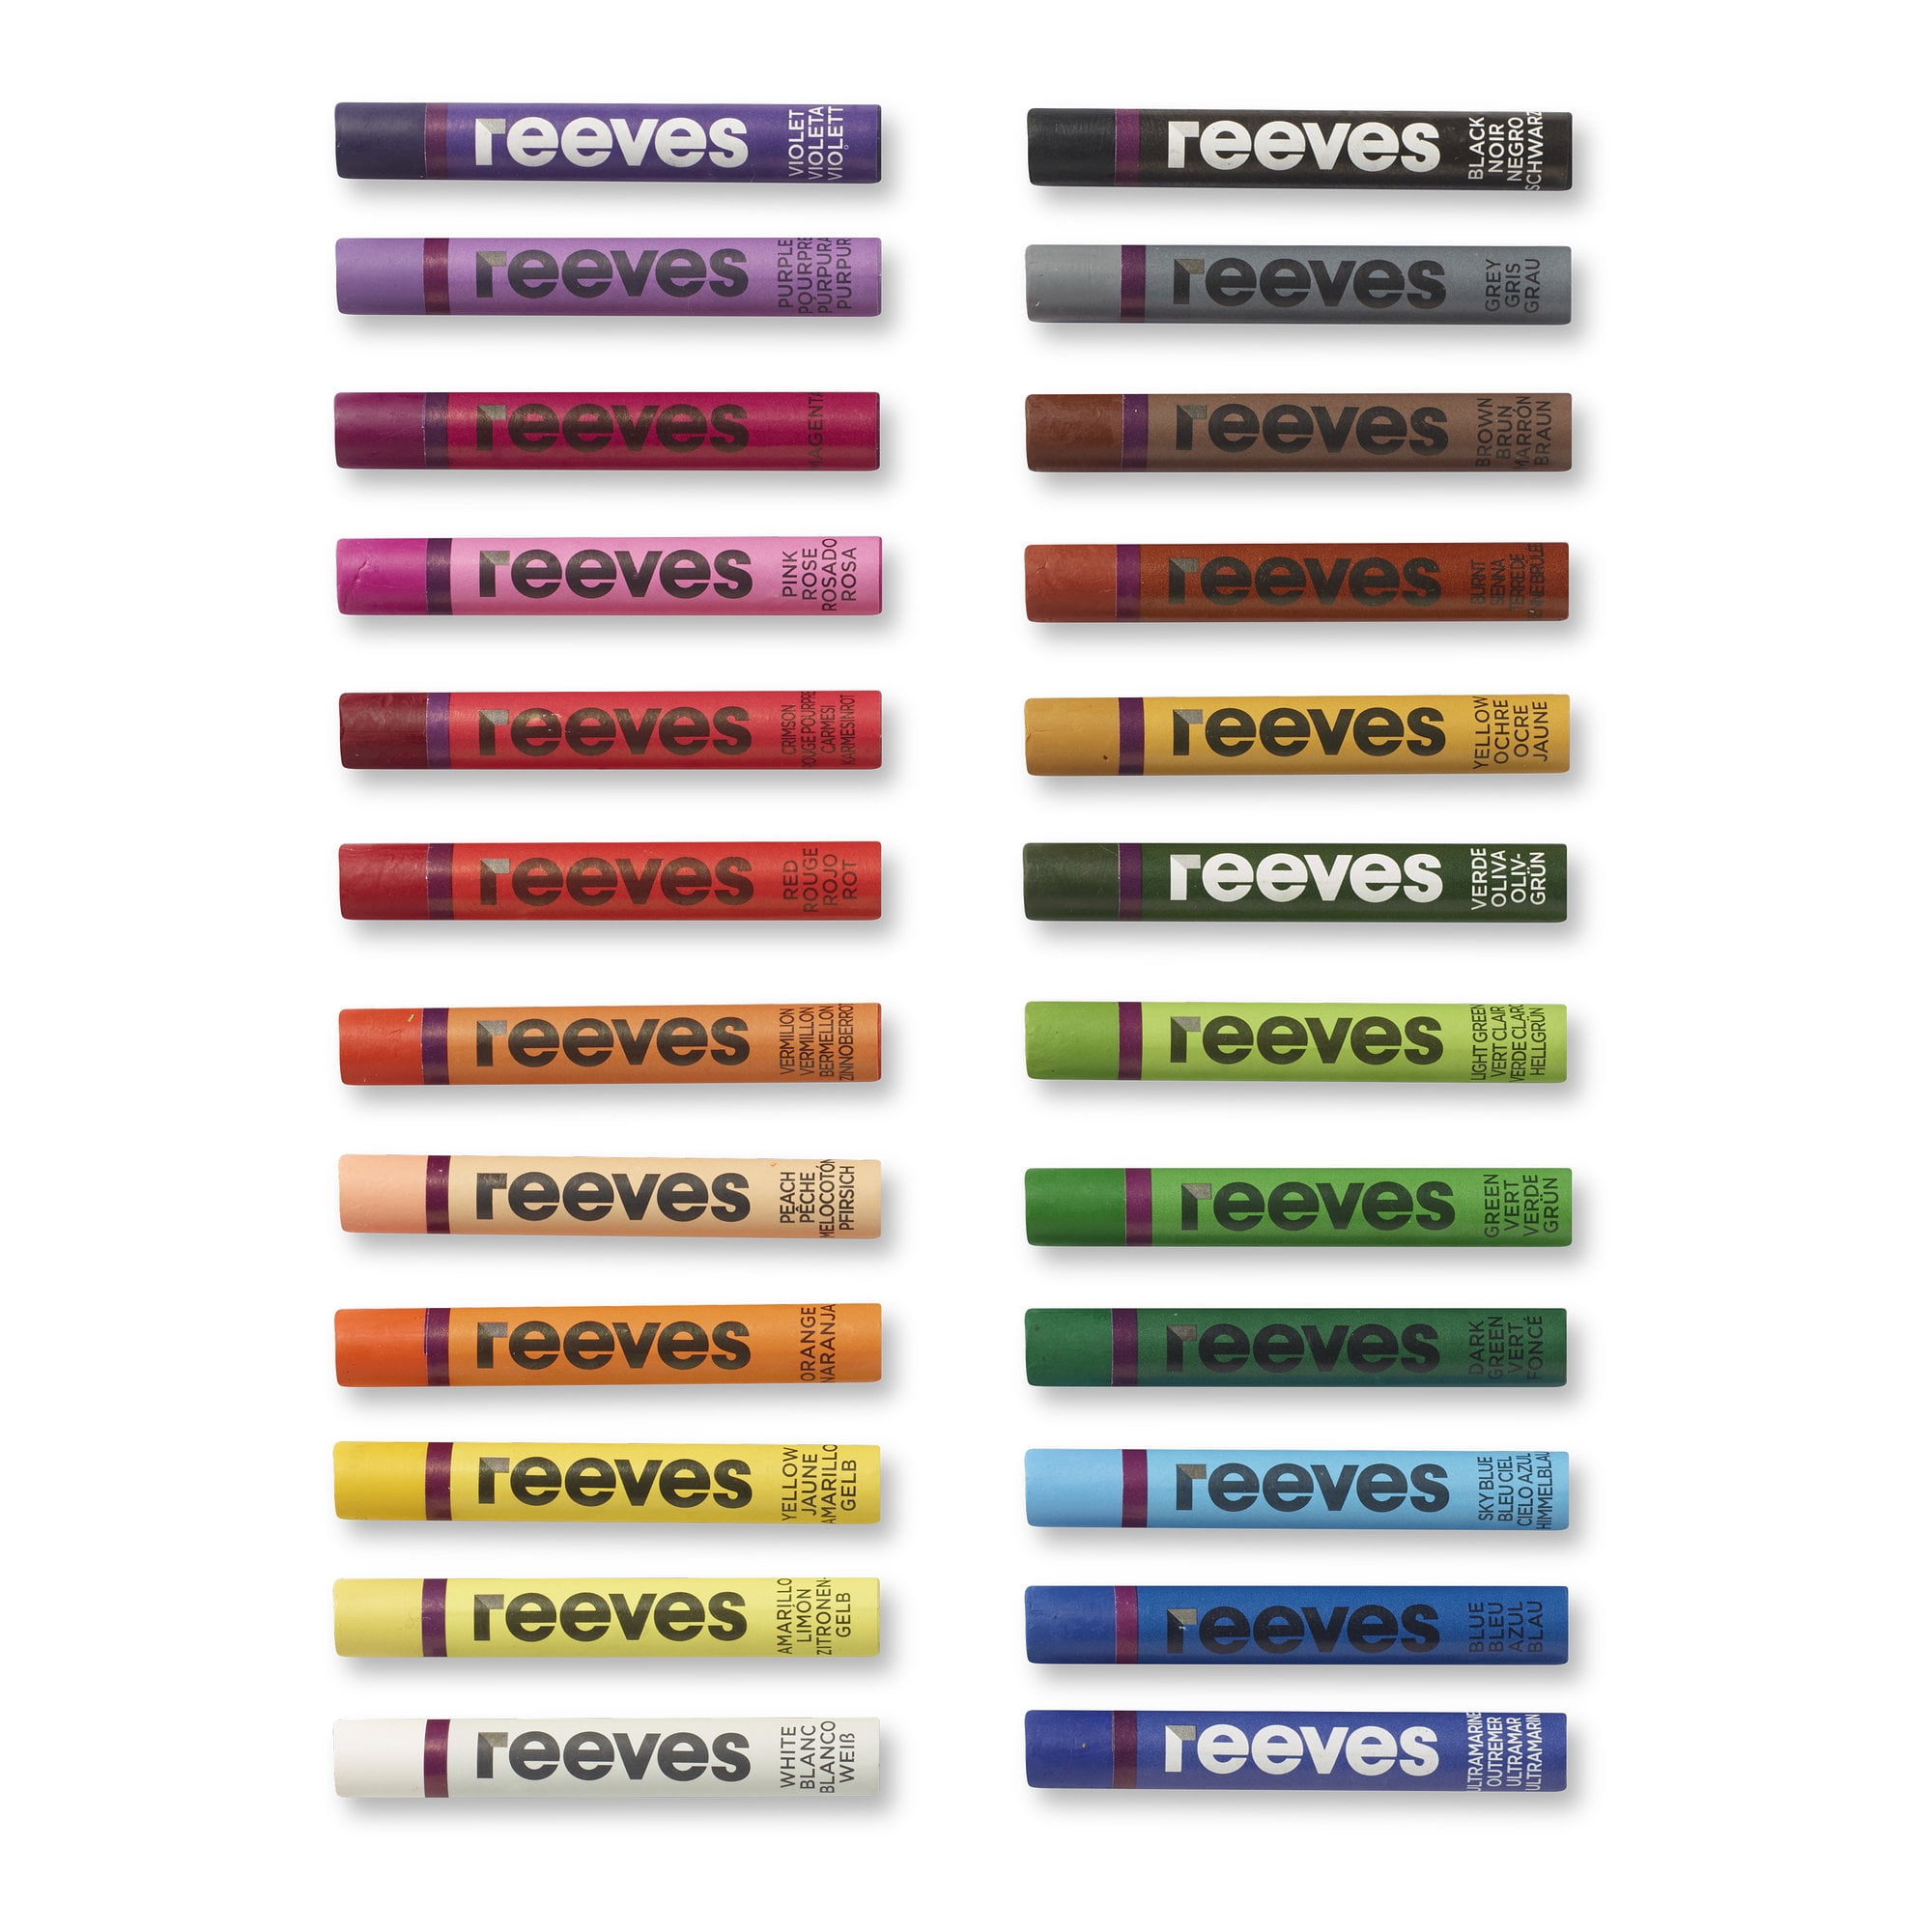 Reeves - 18 Oil Pastels Starter Set (Oil Pastels, Pencil, Drawing Board) NEW